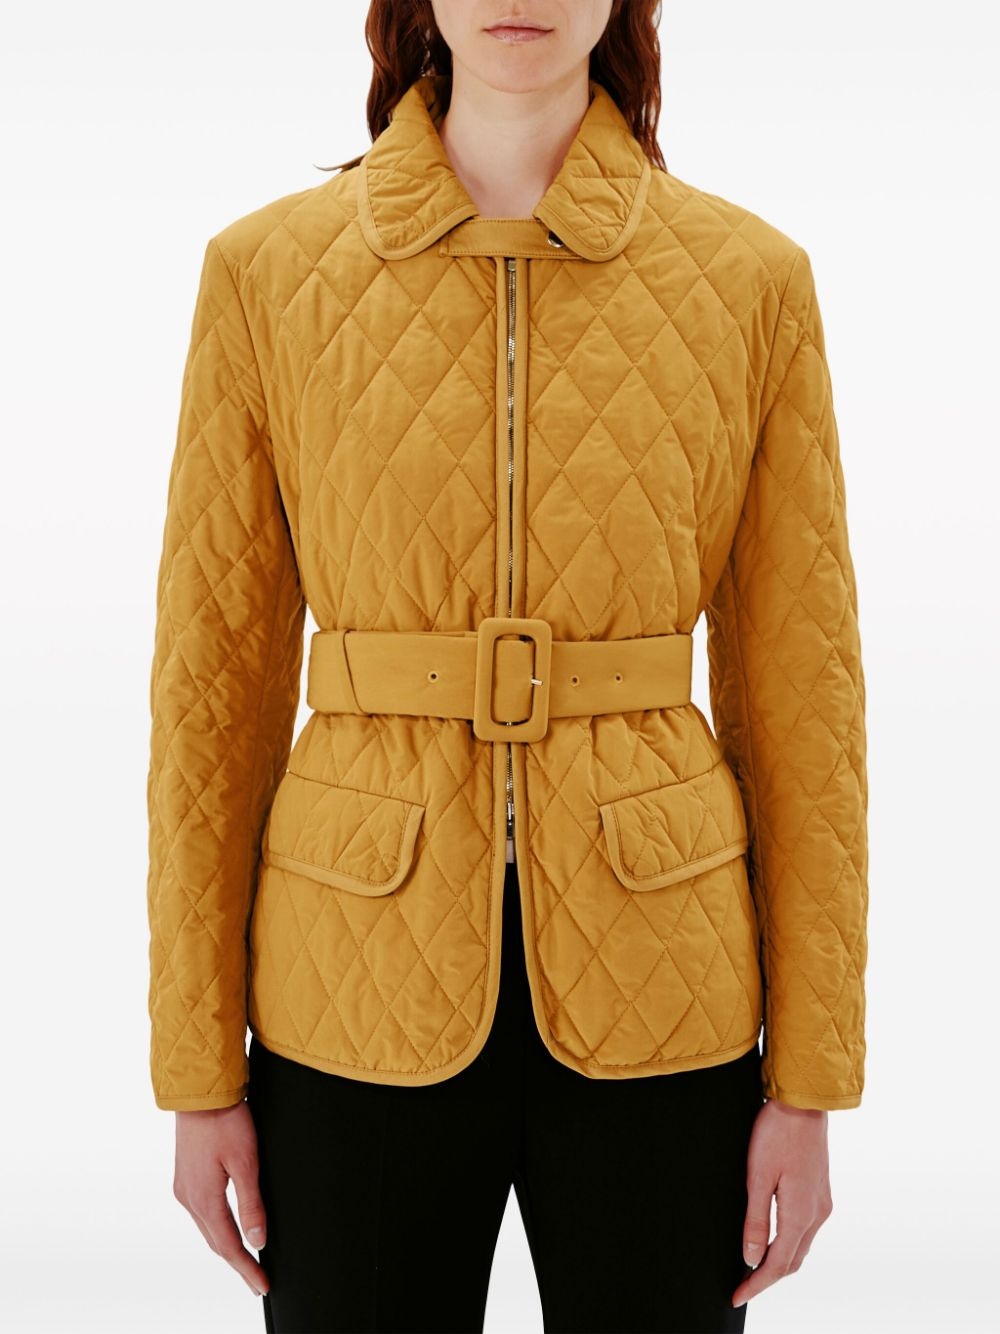 diamond-quilted belted puffer jacket - 6